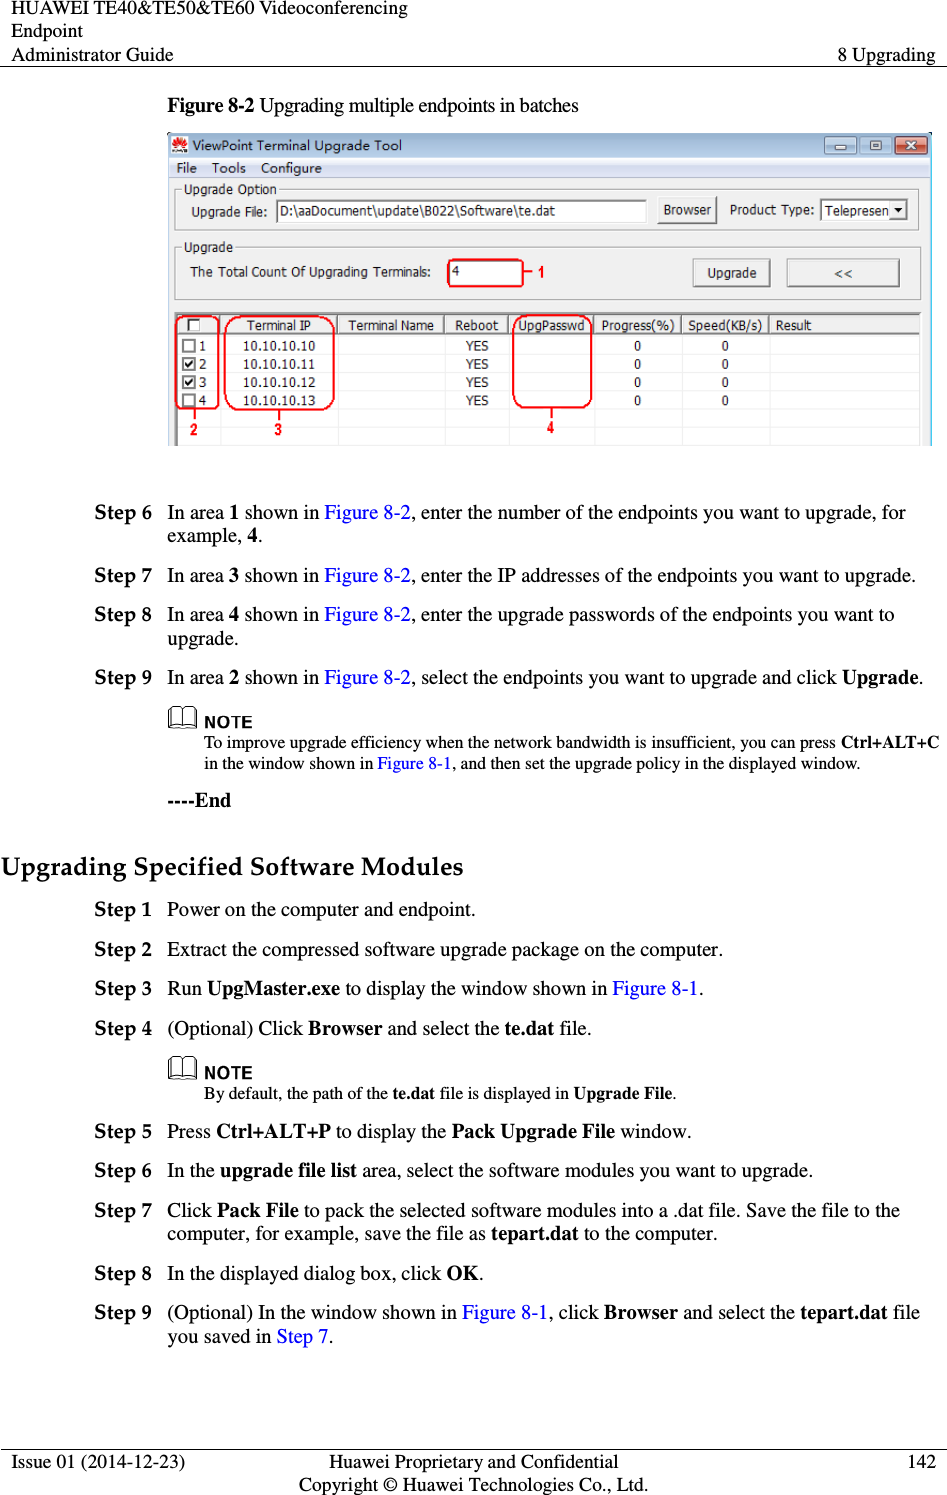 HUAWEI TE40&amp;TE50&amp;TE60 Videoconferencing Endpoint Administrator Guide  8 Upgrading  Issue 01 (2014-12-23)  Huawei Proprietary and Confidential                                     Copyright © Huawei Technologies Co., Ltd. 142  Figure 8-2 Upgrading multiple endpoints in batches   Step 6 In area 1 shown in Figure 8-2, enter the number of the endpoints you want to upgrade, for example, 4.   Step 7 In area 3 shown in Figure 8-2, enter the IP addresses of the endpoints you want to upgrade.   Step 8 In area 4 shown in Figure 8-2, enter the upgrade passwords of the endpoints you want to upgrade.   Step 9 In area 2 shown in Figure 8-2, select the endpoints you want to upgrade and click Upgrade.    To improve upgrade efficiency when the network bandwidth is insufficient, you can press Ctrl+ALT+C in the window shown in Figure 8-1, and then set the upgrade policy in the displayed window. ----End Upgrading Specified Software Modules Step 1 Power on the computer and endpoint. Step 2 Extract the compressed software upgrade package on the computer.   Step 3 Run UpgMaster.exe to display the window shown in Figure 8-1. Step 4 (Optional) Click Browser and select the te.dat file.  By default, the path of the te.dat file is displayed in Upgrade File. Step 5 Press Ctrl+ALT+P to display the Pack Upgrade File window.   Step 6 In the upgrade file list area, select the software modules you want to upgrade. Step 7 Click Pack File to pack the selected software modules into a .dat file. Save the file to the computer, for example, save the file as tepart.dat to the computer. Step 8 In the displayed dialog box, click OK. Step 9 (Optional) In the window shown in Figure 8-1, click Browser and select the tepart.dat file you saved in Step 7. 